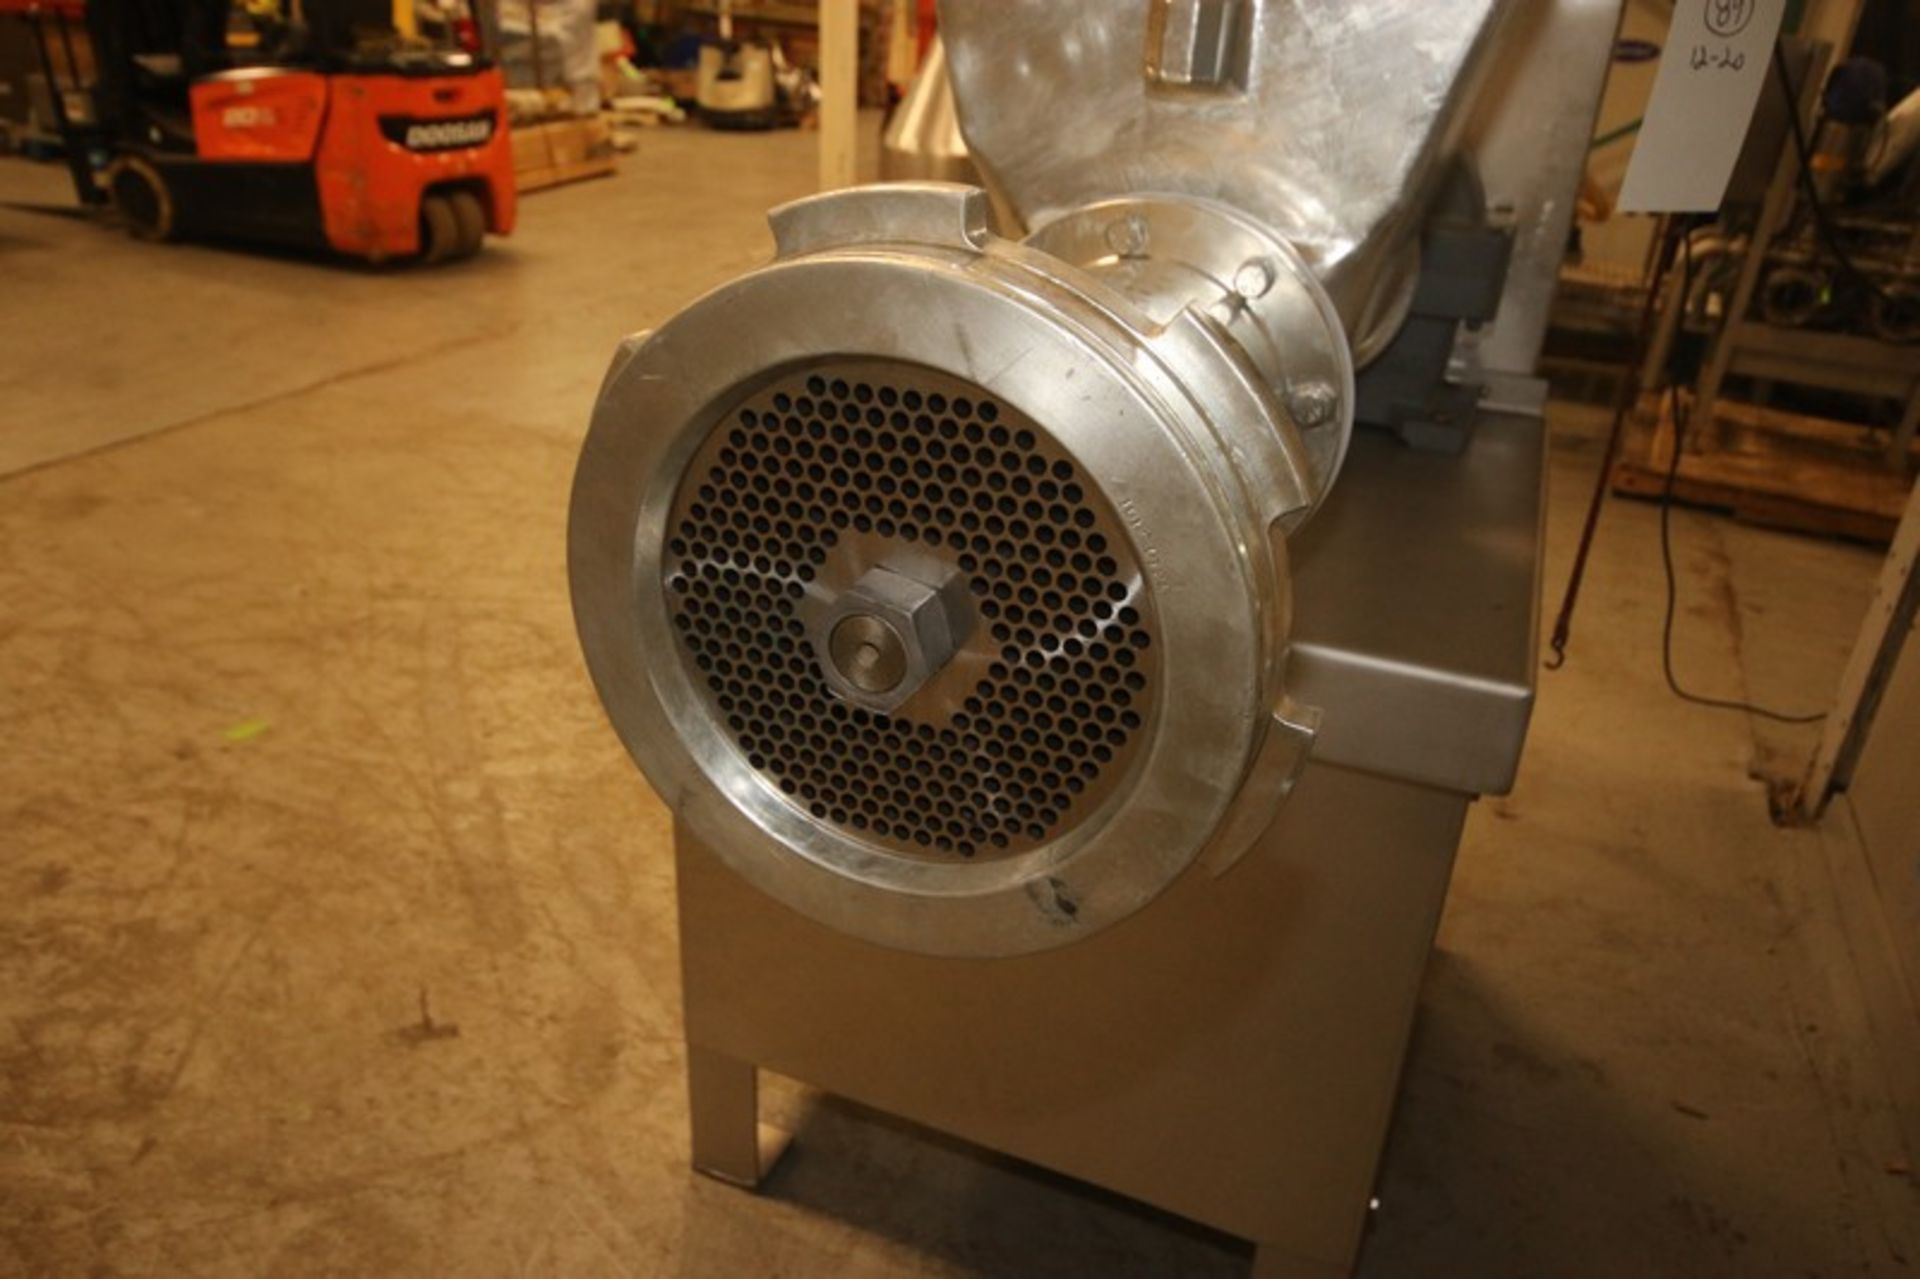 Weiler 1167 S/S Meat Grinder, with Aprox. 10" Dia. Discharge, with S/S Infeed Chute with S/S Auger - Image 3 of 7